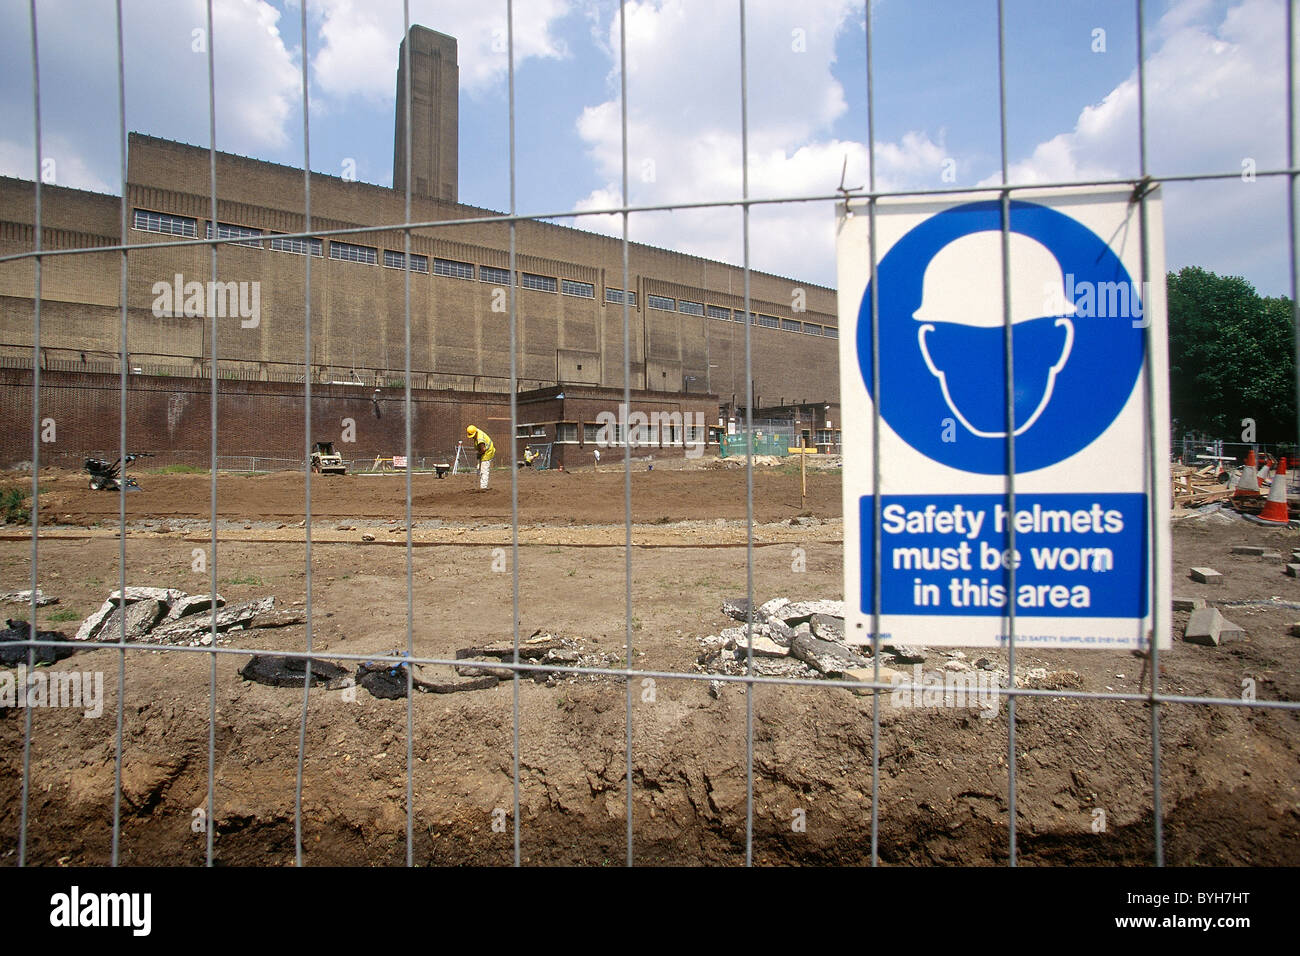 Temporary fencing and safety sign during conversion of Bankside Power Station into Tate Modern Museum of Modern Art. London. Stock Photo